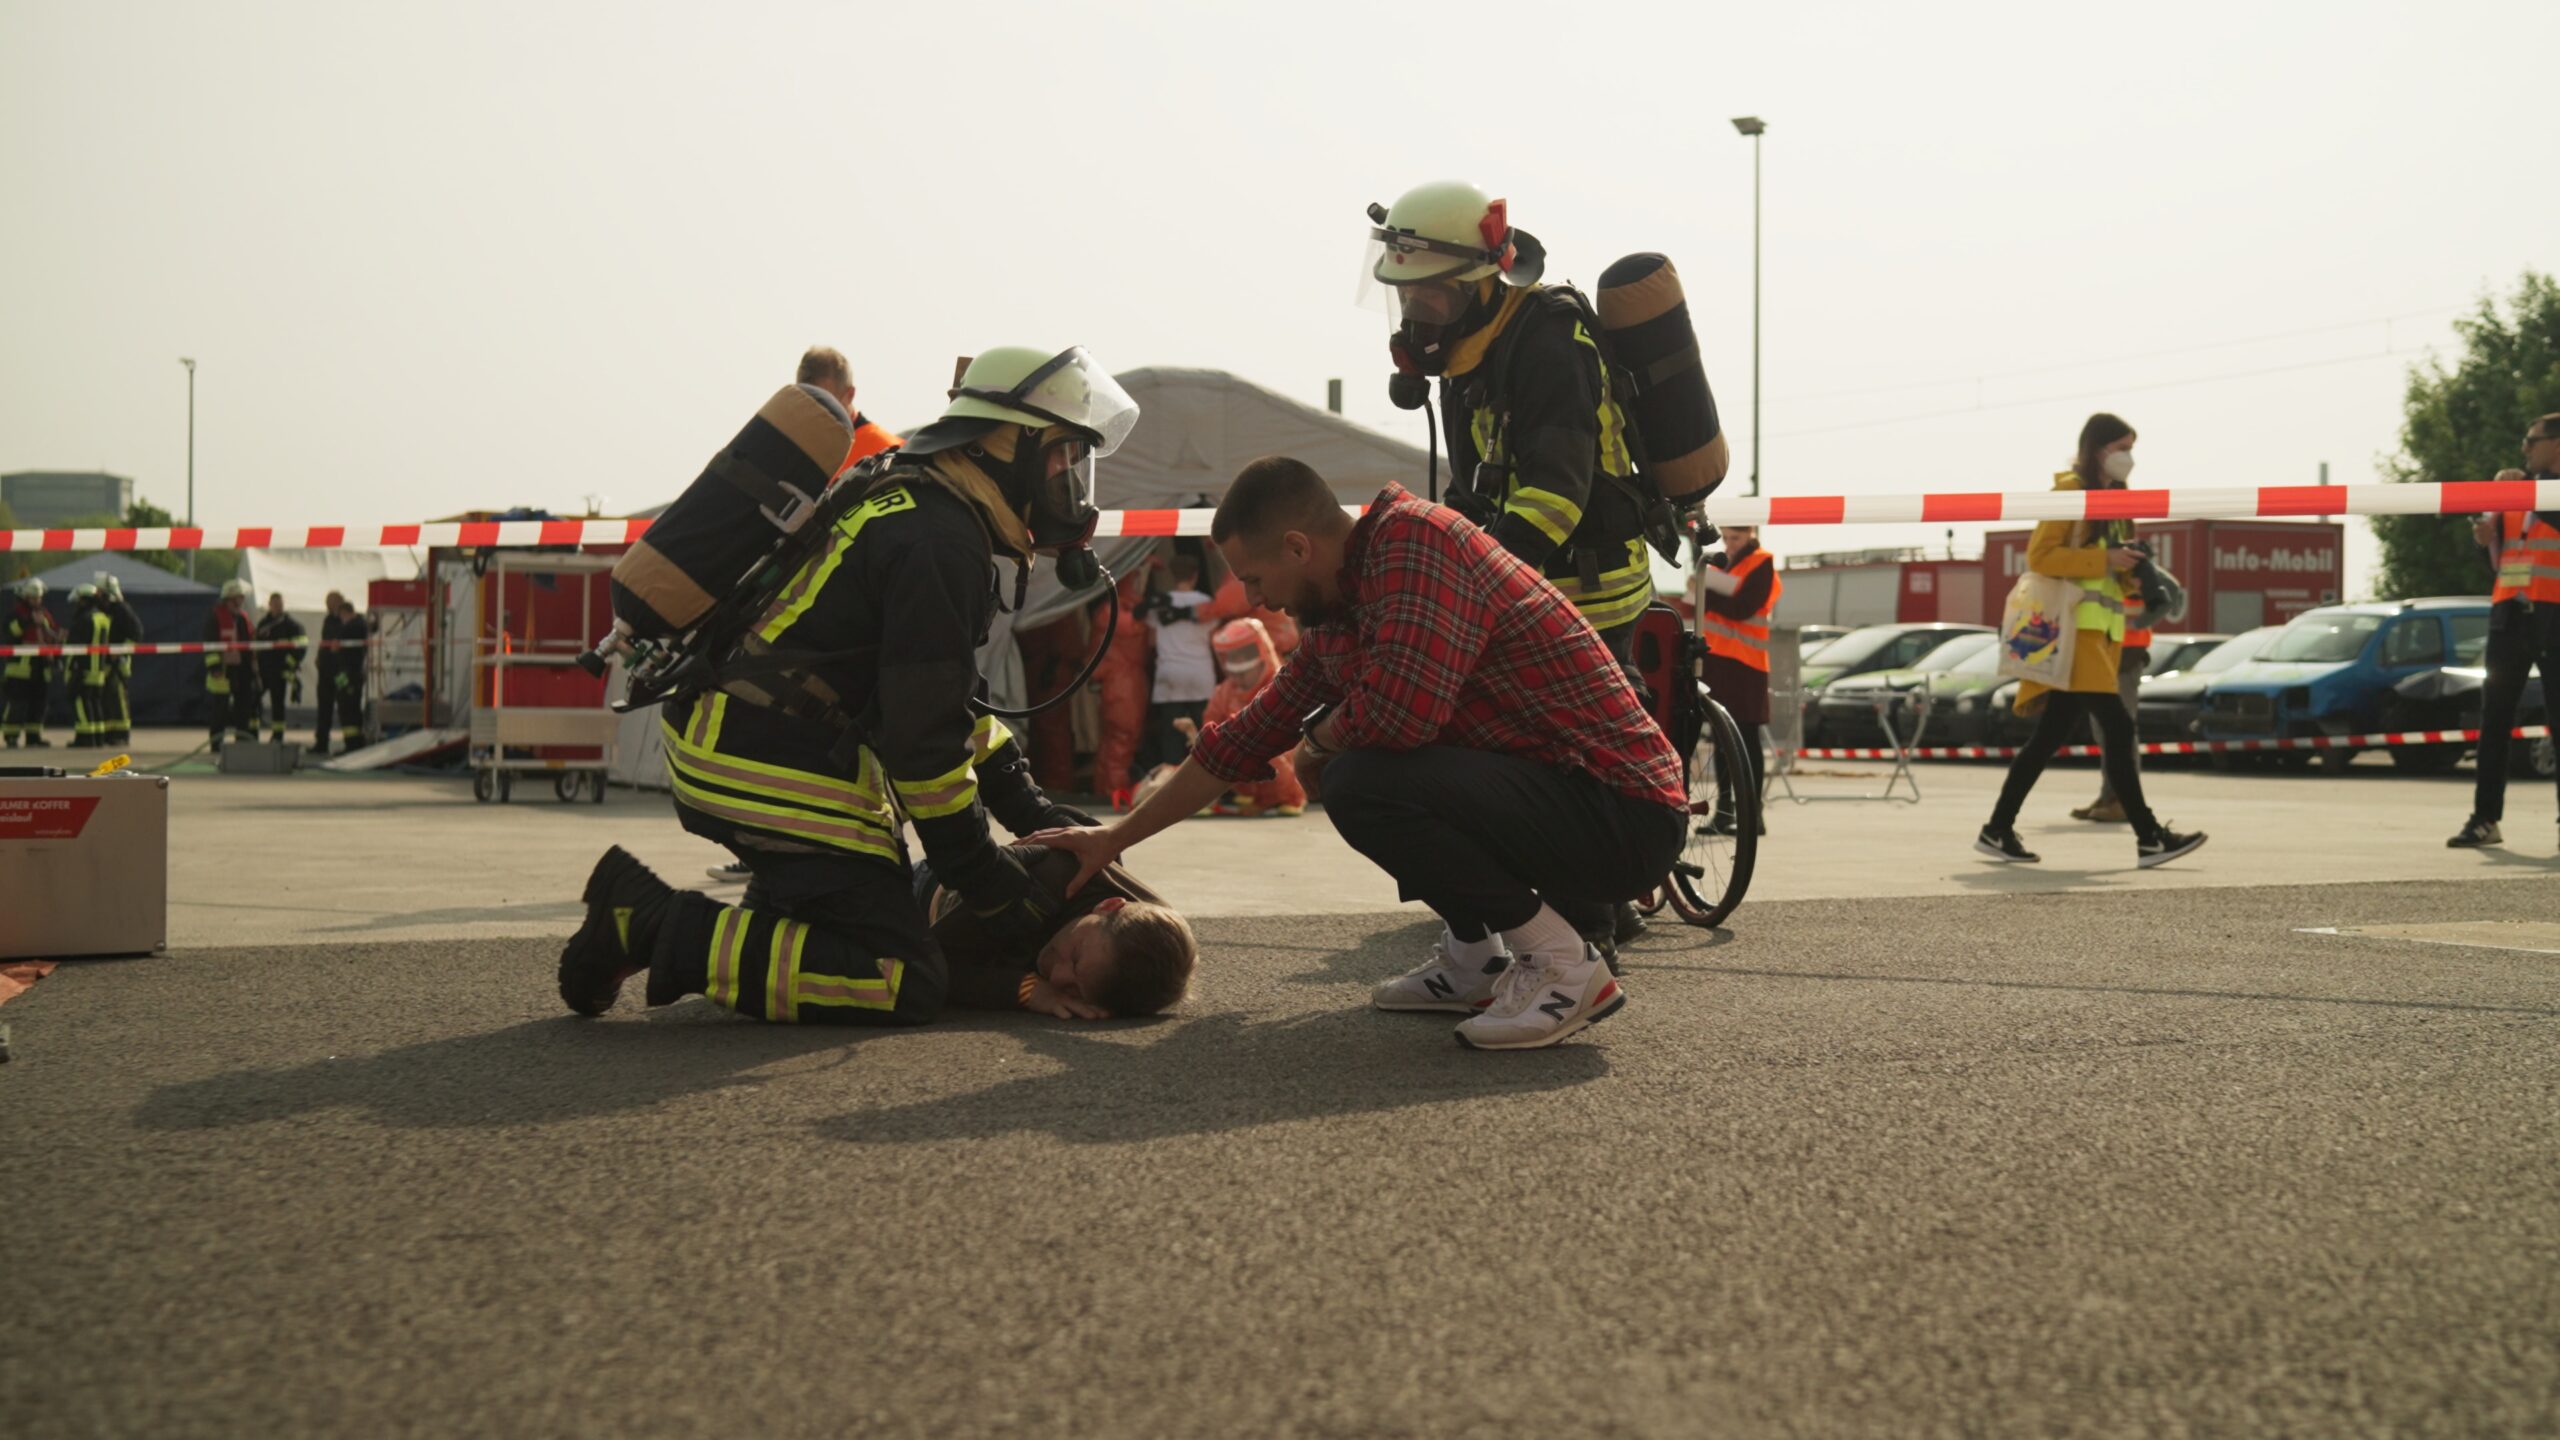 Two firefighters checking the health condition of participant lying on the ground and another participant putting his hand on shoulders of lying participant